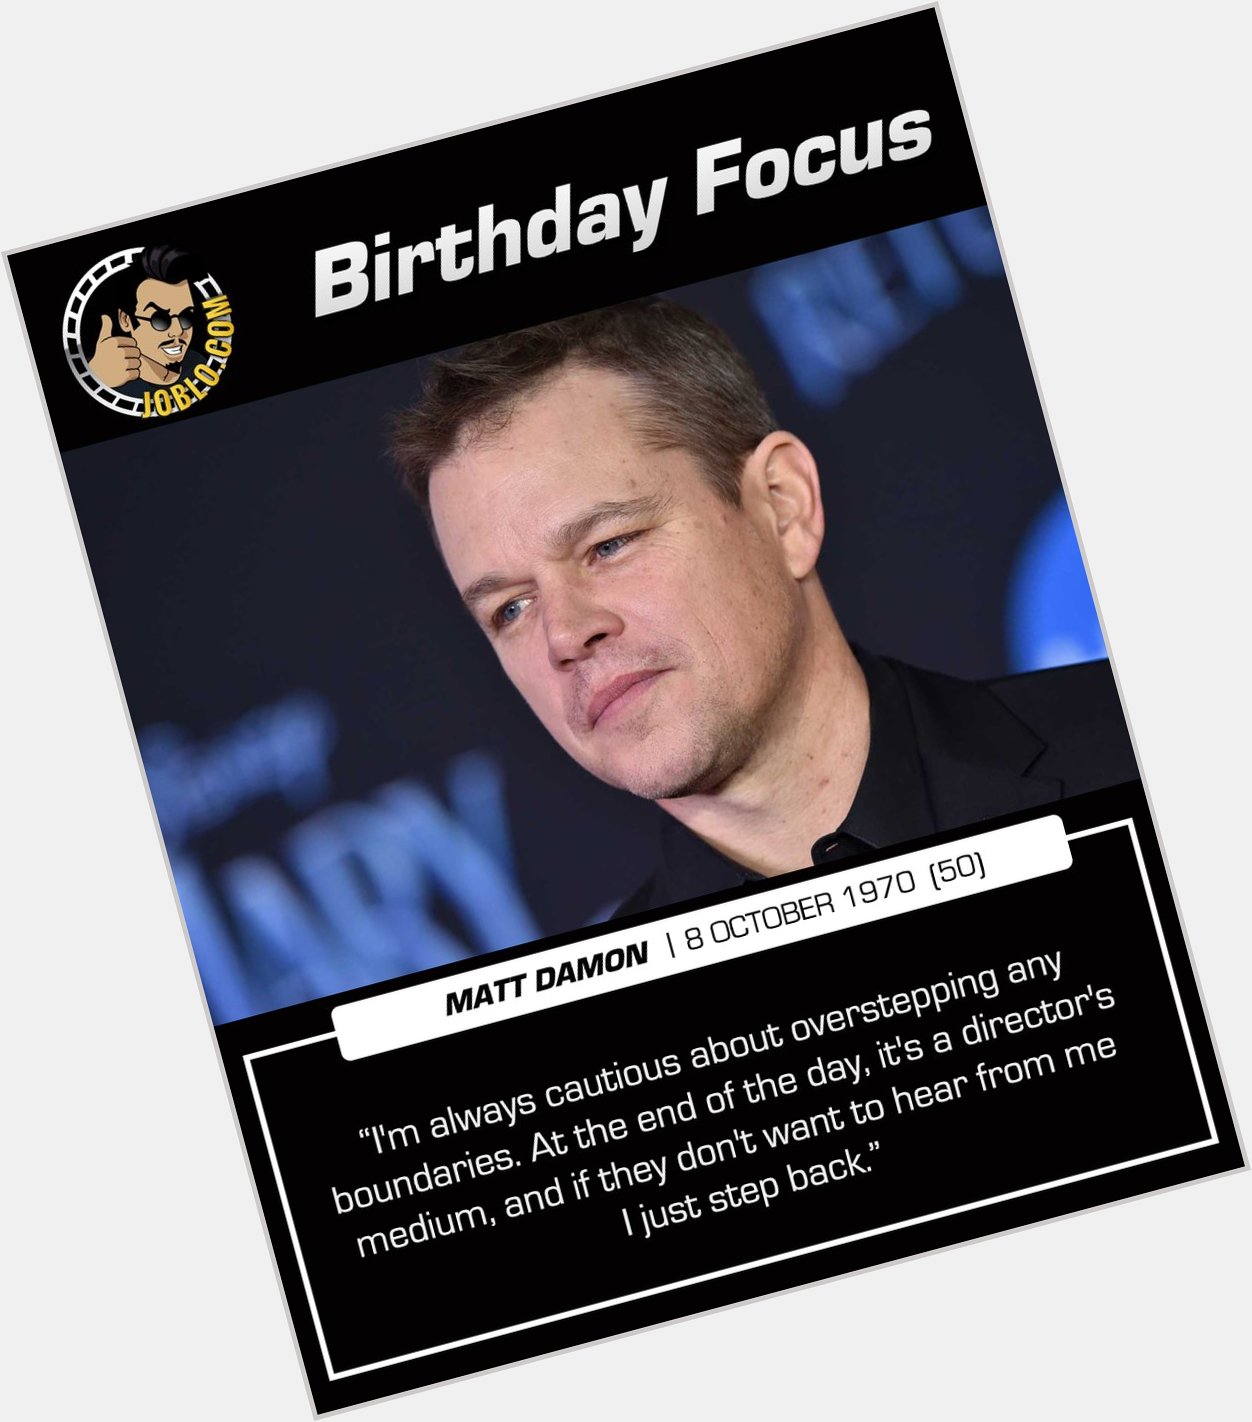 Wishing a very happy 50th birthday to Matt Damon!

What do you think is his best on-screen performance? 